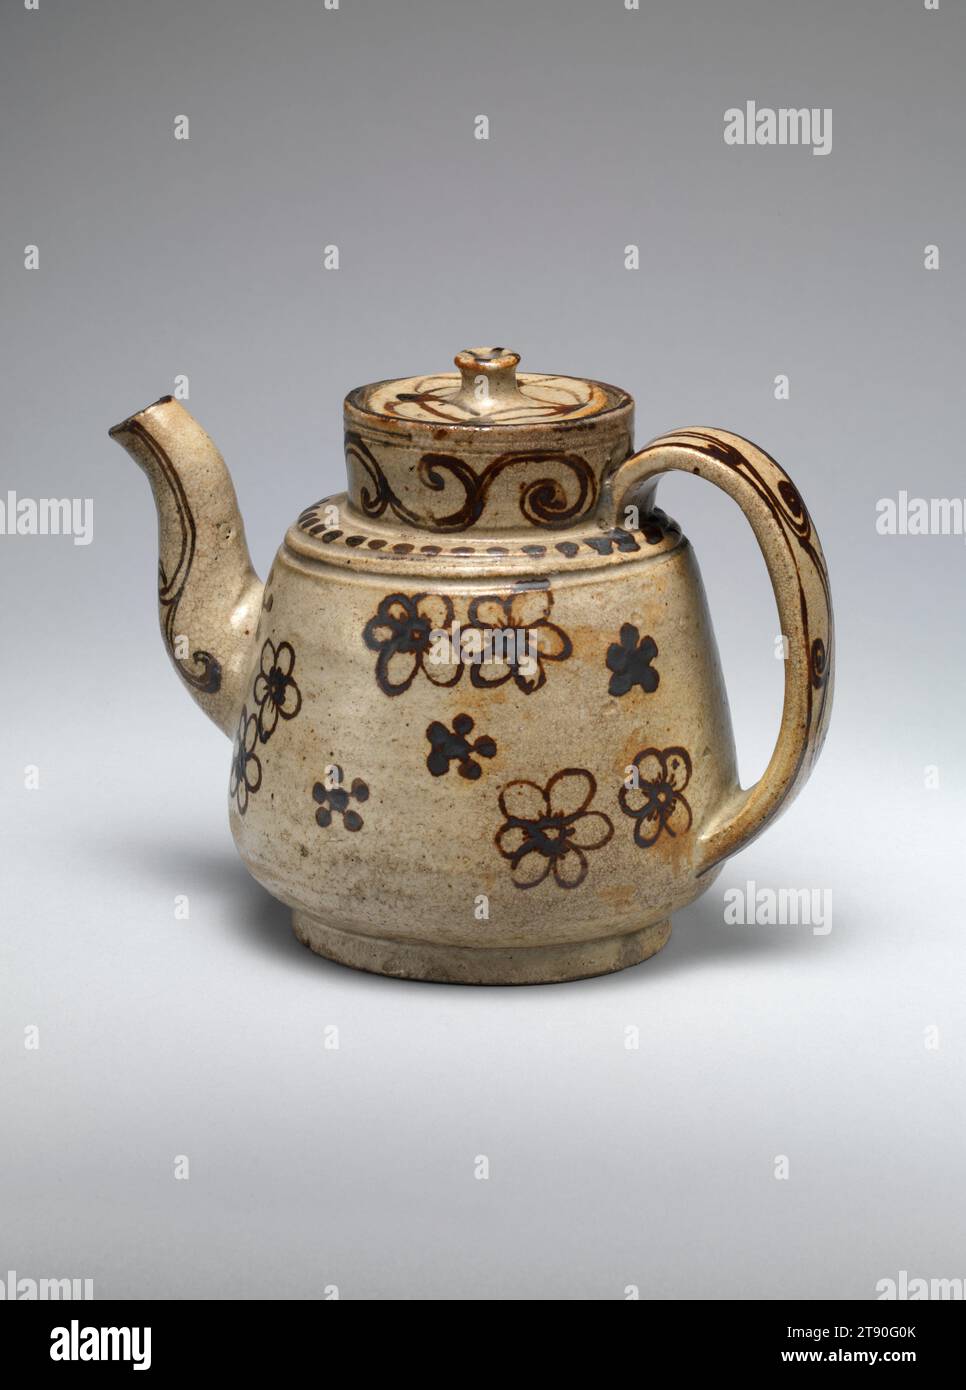 Ewer with willow and plum blossoms, early 17th century, Unknown Japanese, 6 5/8 × 8 5/16 × 5 1/2 in. (16.83 × 21.11 × 13.97 cm), Mino ware, Oribe type; stoneware with iron oxide, Japan, 17th century, Oribe ceramics, which were made from the late 1600s to early 1700s at kilns in the area of Mino Province in central Japan, often feature colorful, sometimes abstract designs and take whimsical, asymmetrical forms. Oribe ware takes its name from Furuta Oribe (1544–1615), a famous master of the Japanese tea ceremony Stock Photo